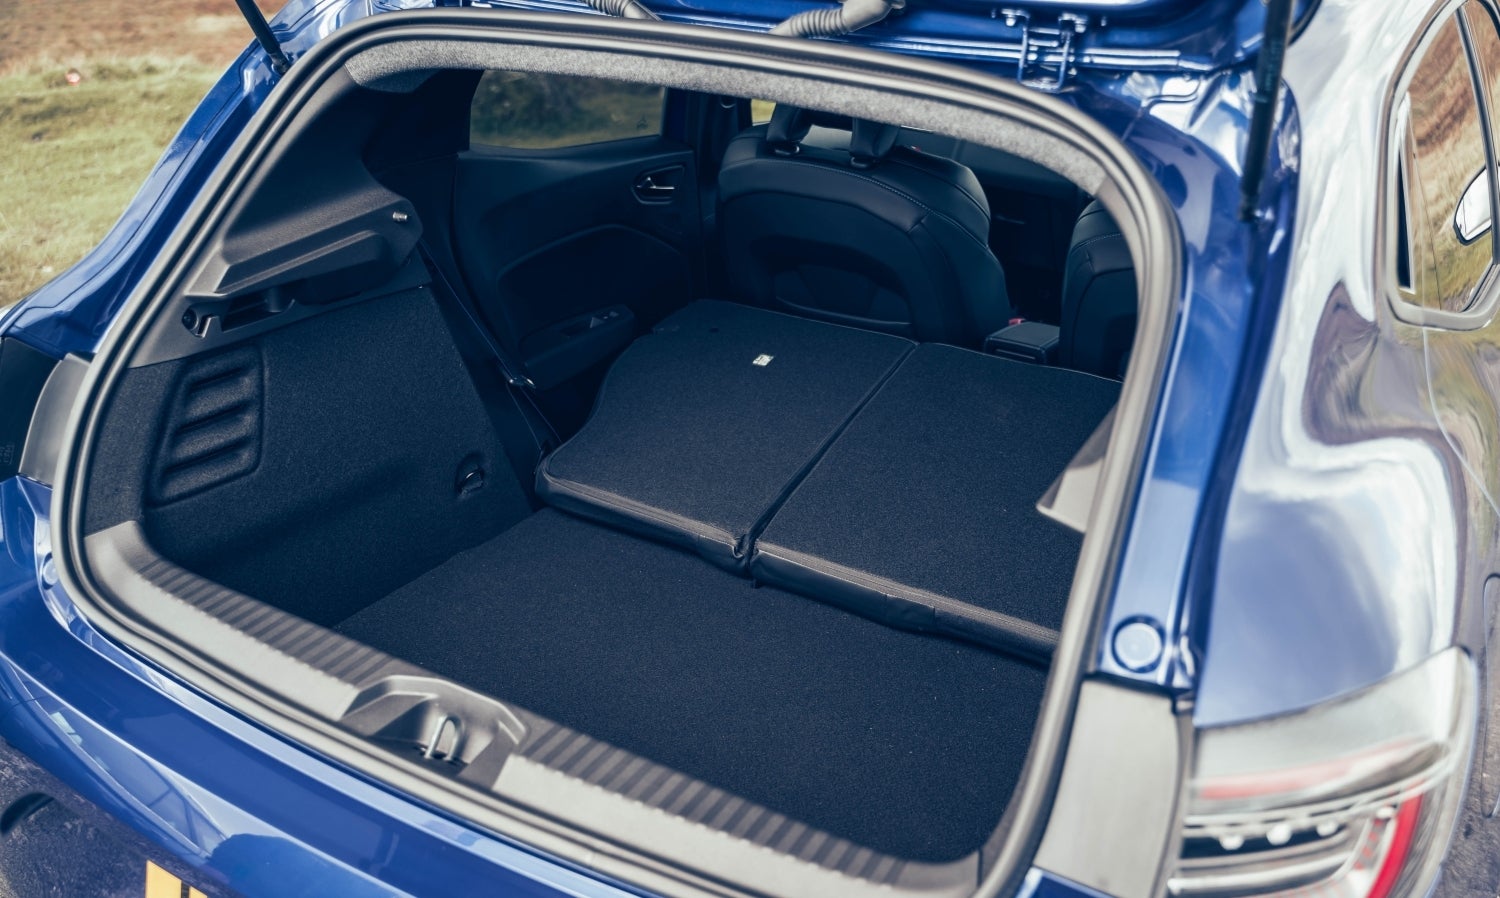 Switch from 391-litre boot space to 1,069 litres with the rear seats folded